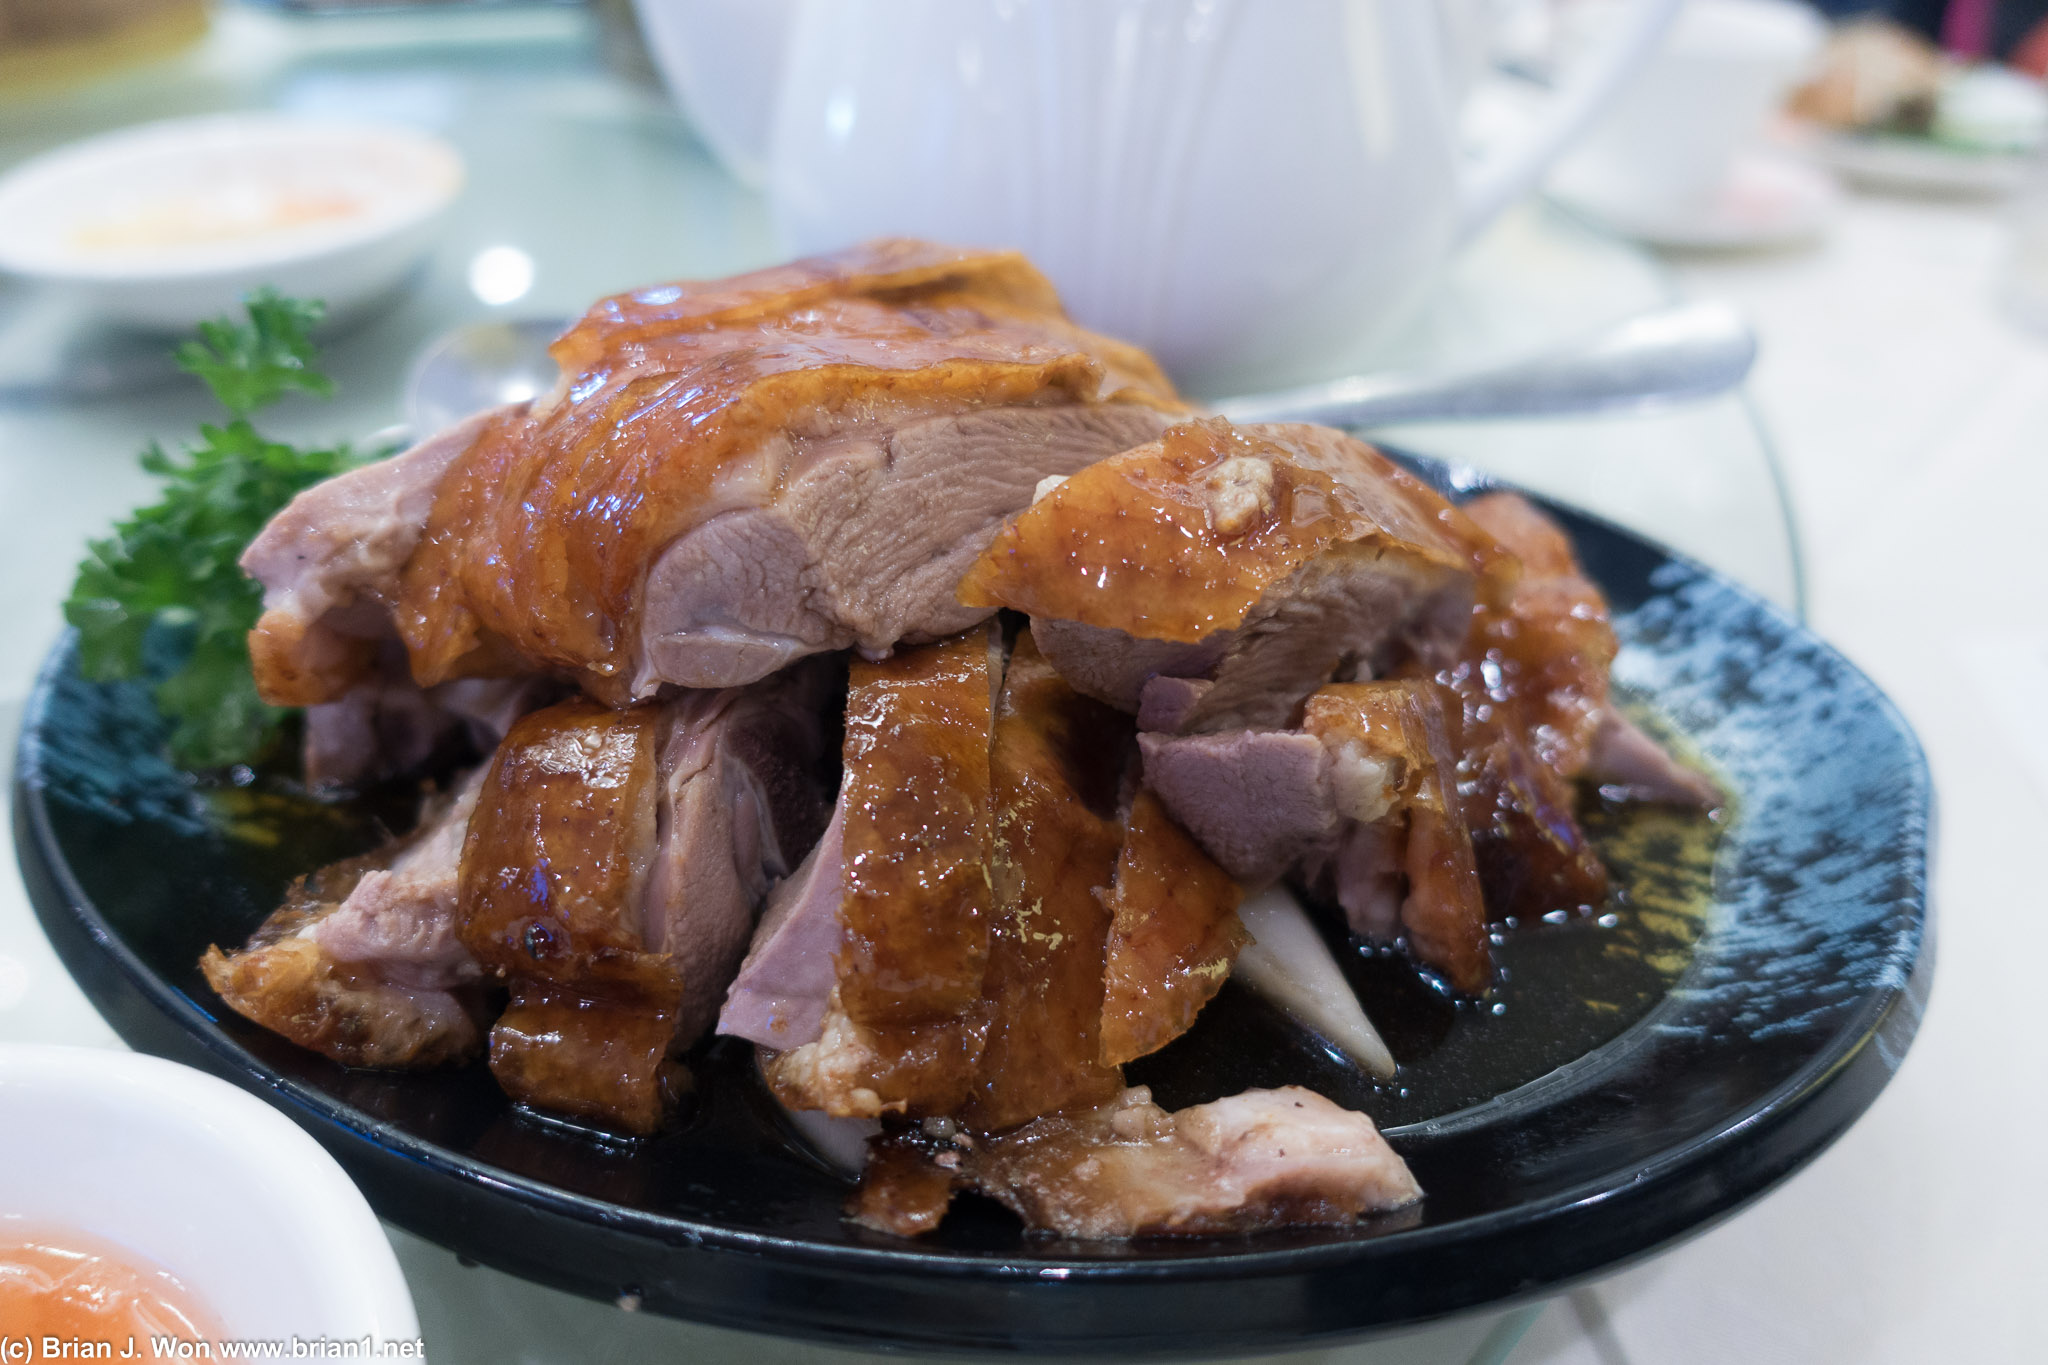 Roast duck. Pretty decent but clearly not the specialty of the dim sum side.